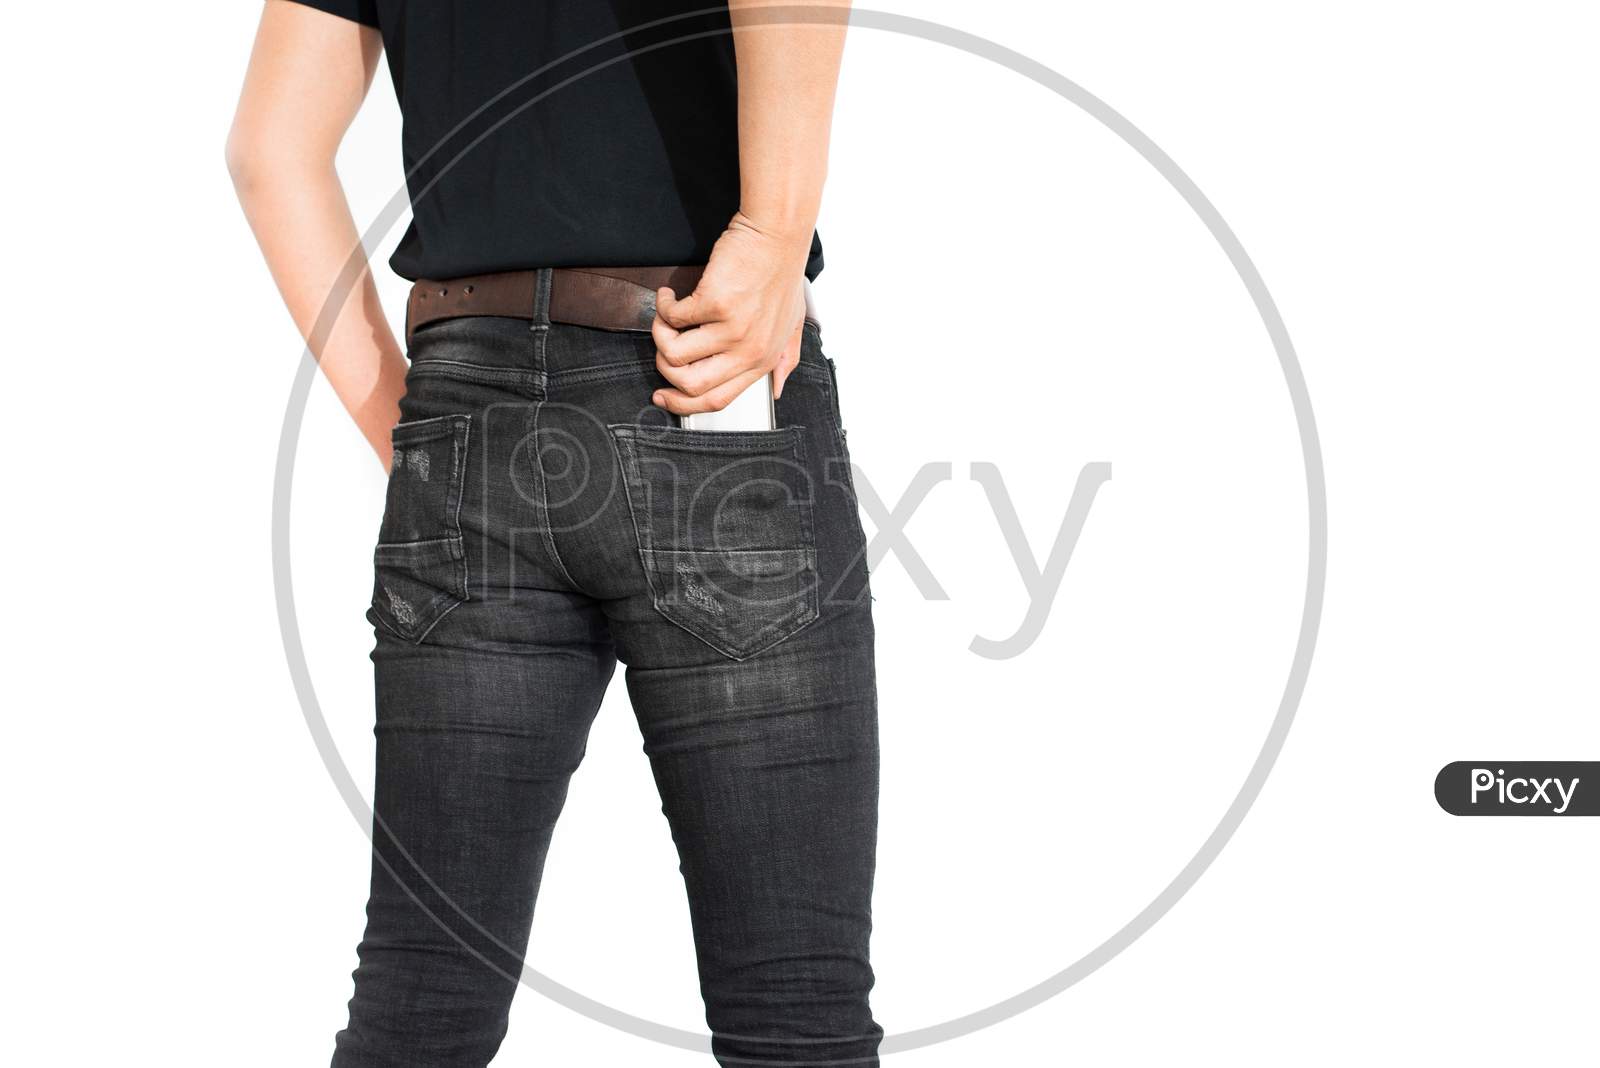 Back View Of Lower Body Of Man Putting Smart Phone Into Pocket On Isolated White Background. Man Wearing Jeans And Casual. Technology And Lifestyle Concept